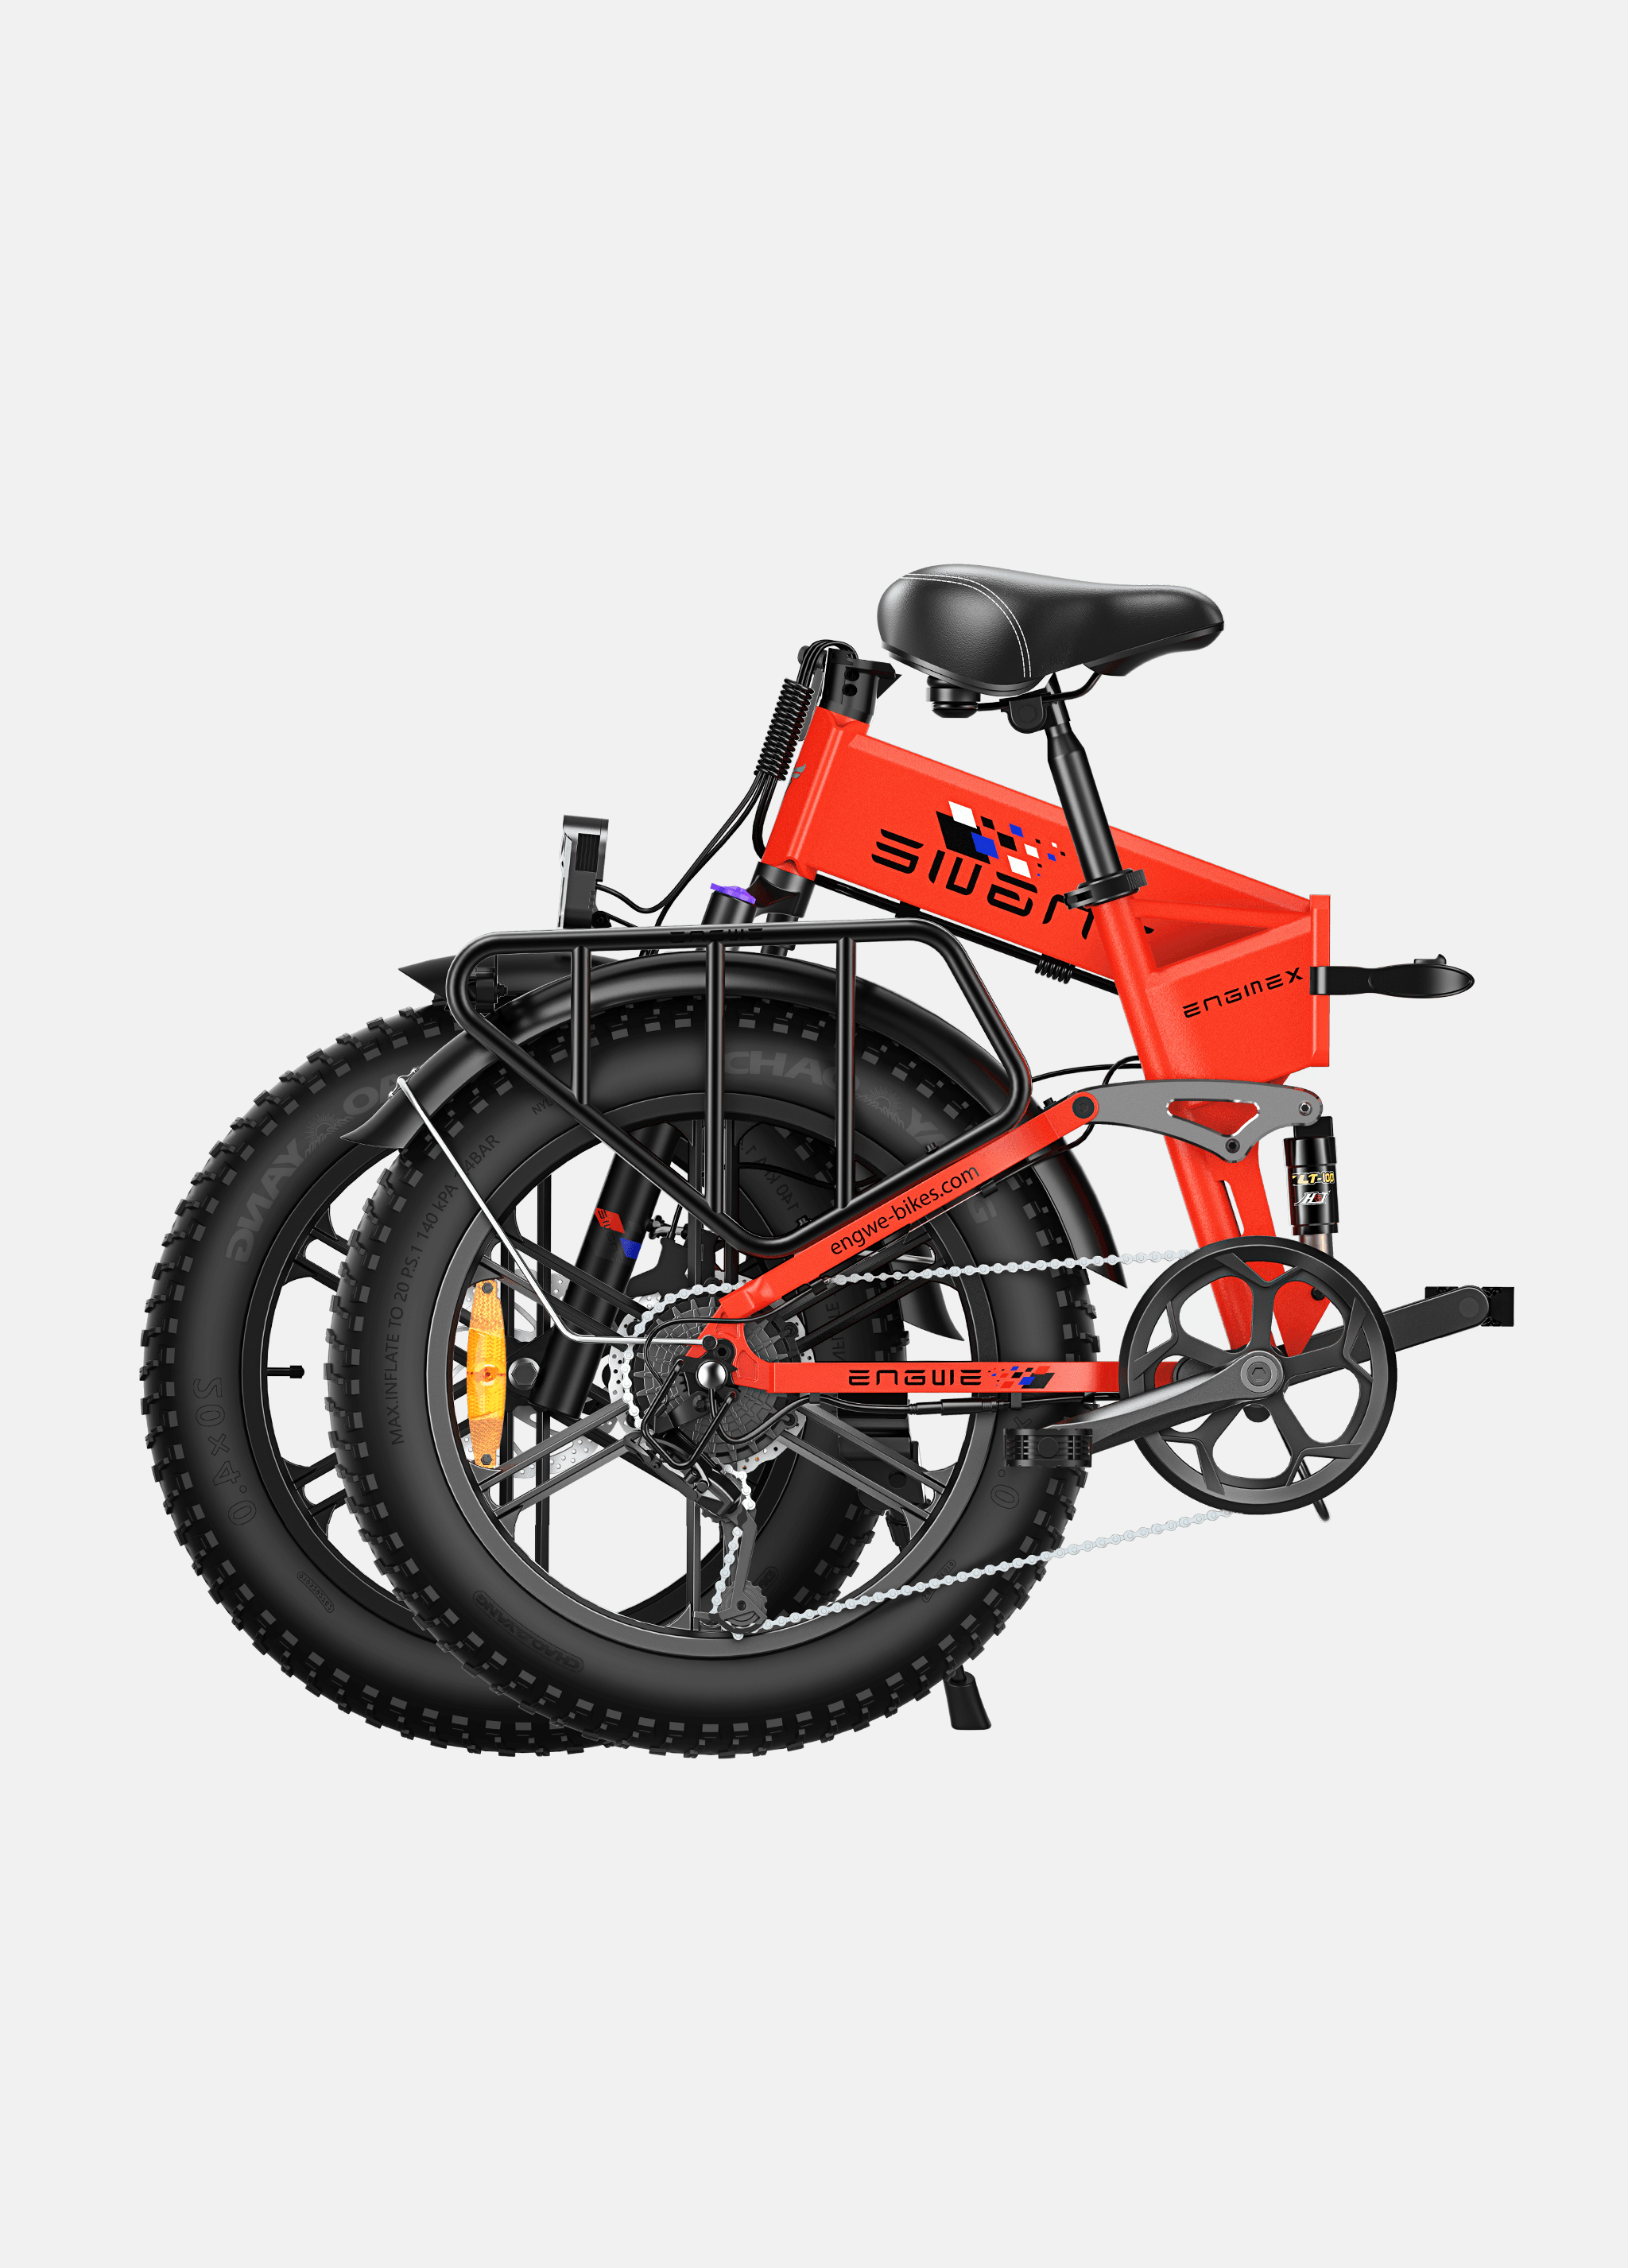 Engwe Engine X (upgraded) Preorder - Pogo cycles UK -cycle to work scheme available